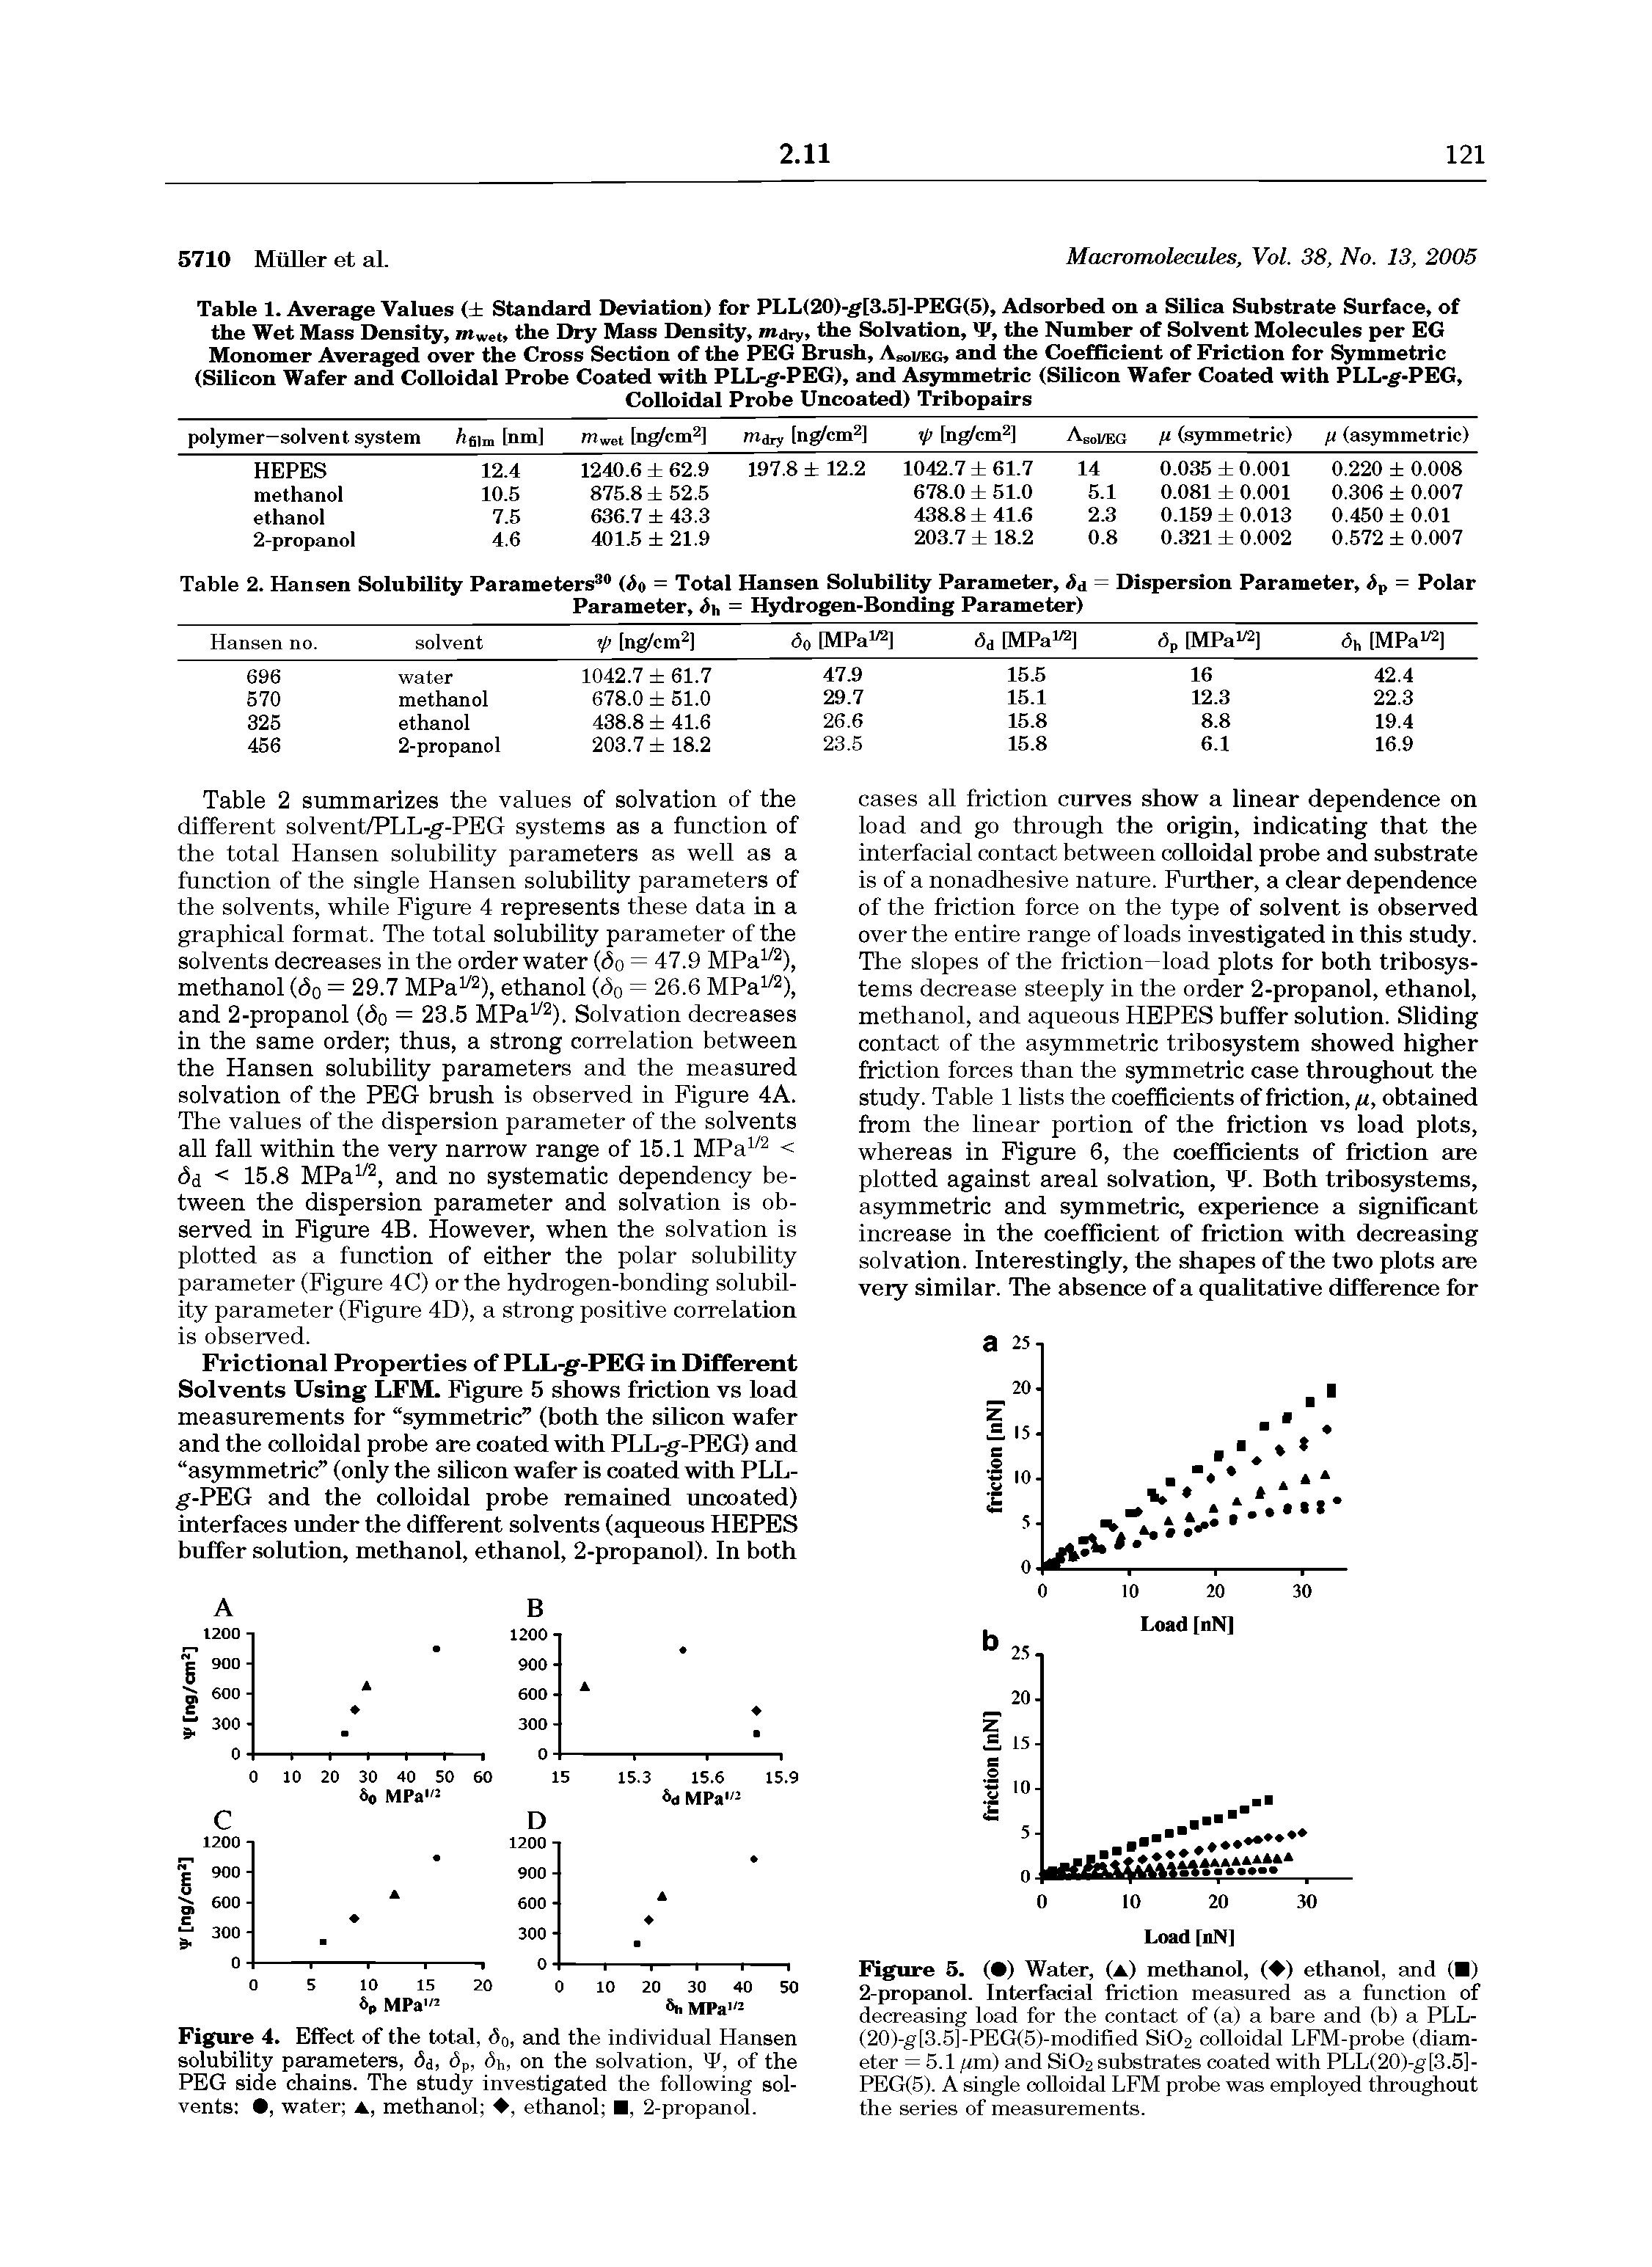 Figure 4. Effect of the total, do, and the individual Hansen solubility parameters, dd, dp, dh, on the solvation, W, of the PEG side chains. The study investigated the following solvents , water , methanol , ethanol , 2-propanol.